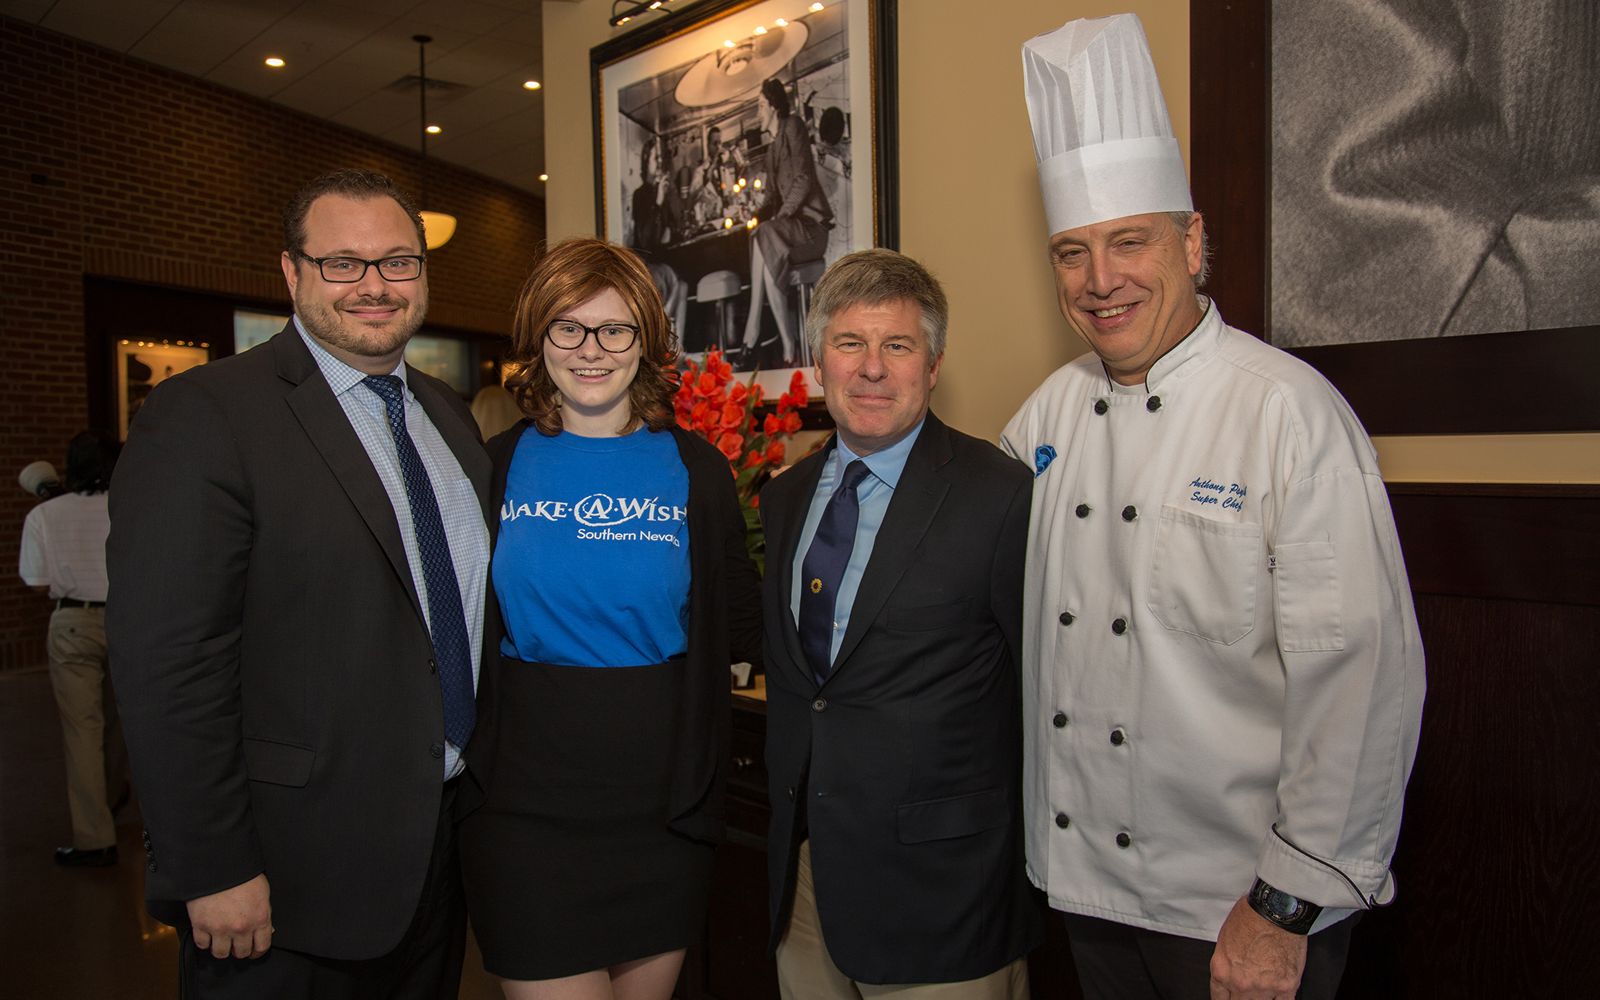 Maggiano's Donates More Than $700,000 to Make-A-Wish